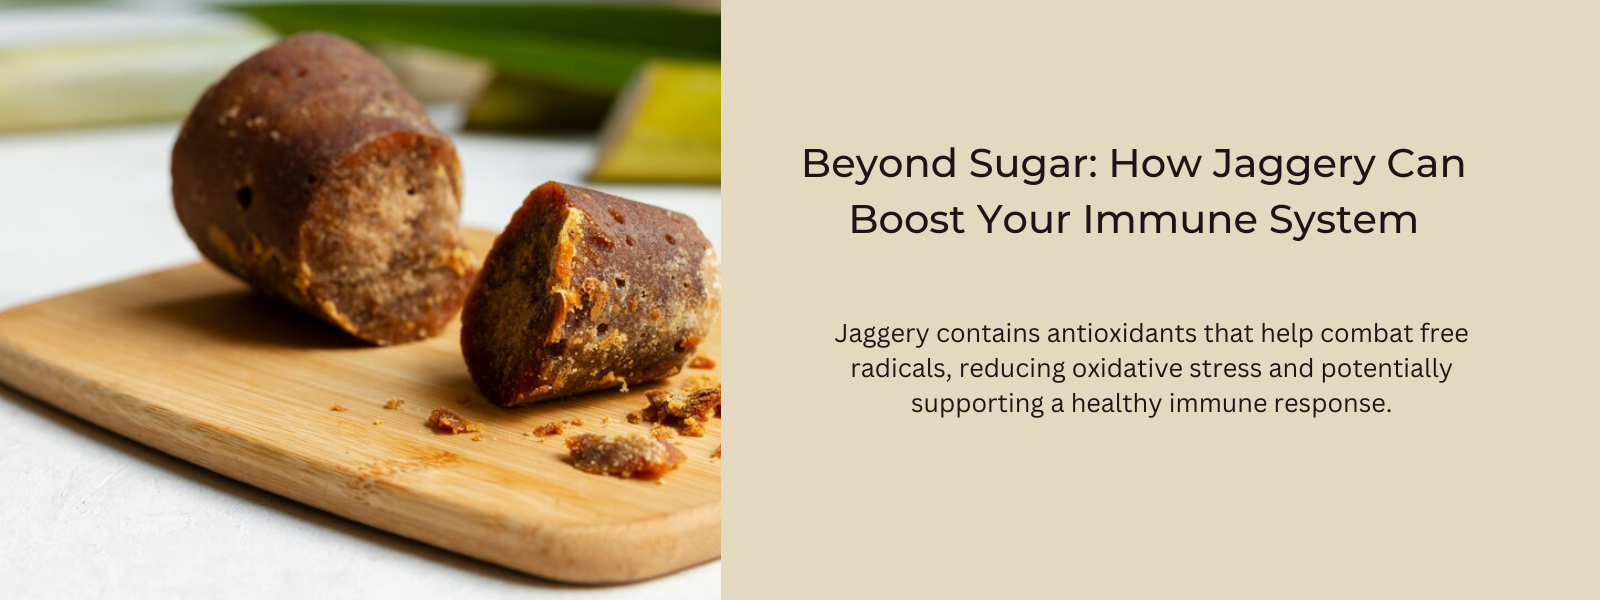 Beyond Sugar: How Jaggery Can Boost Your Immune System